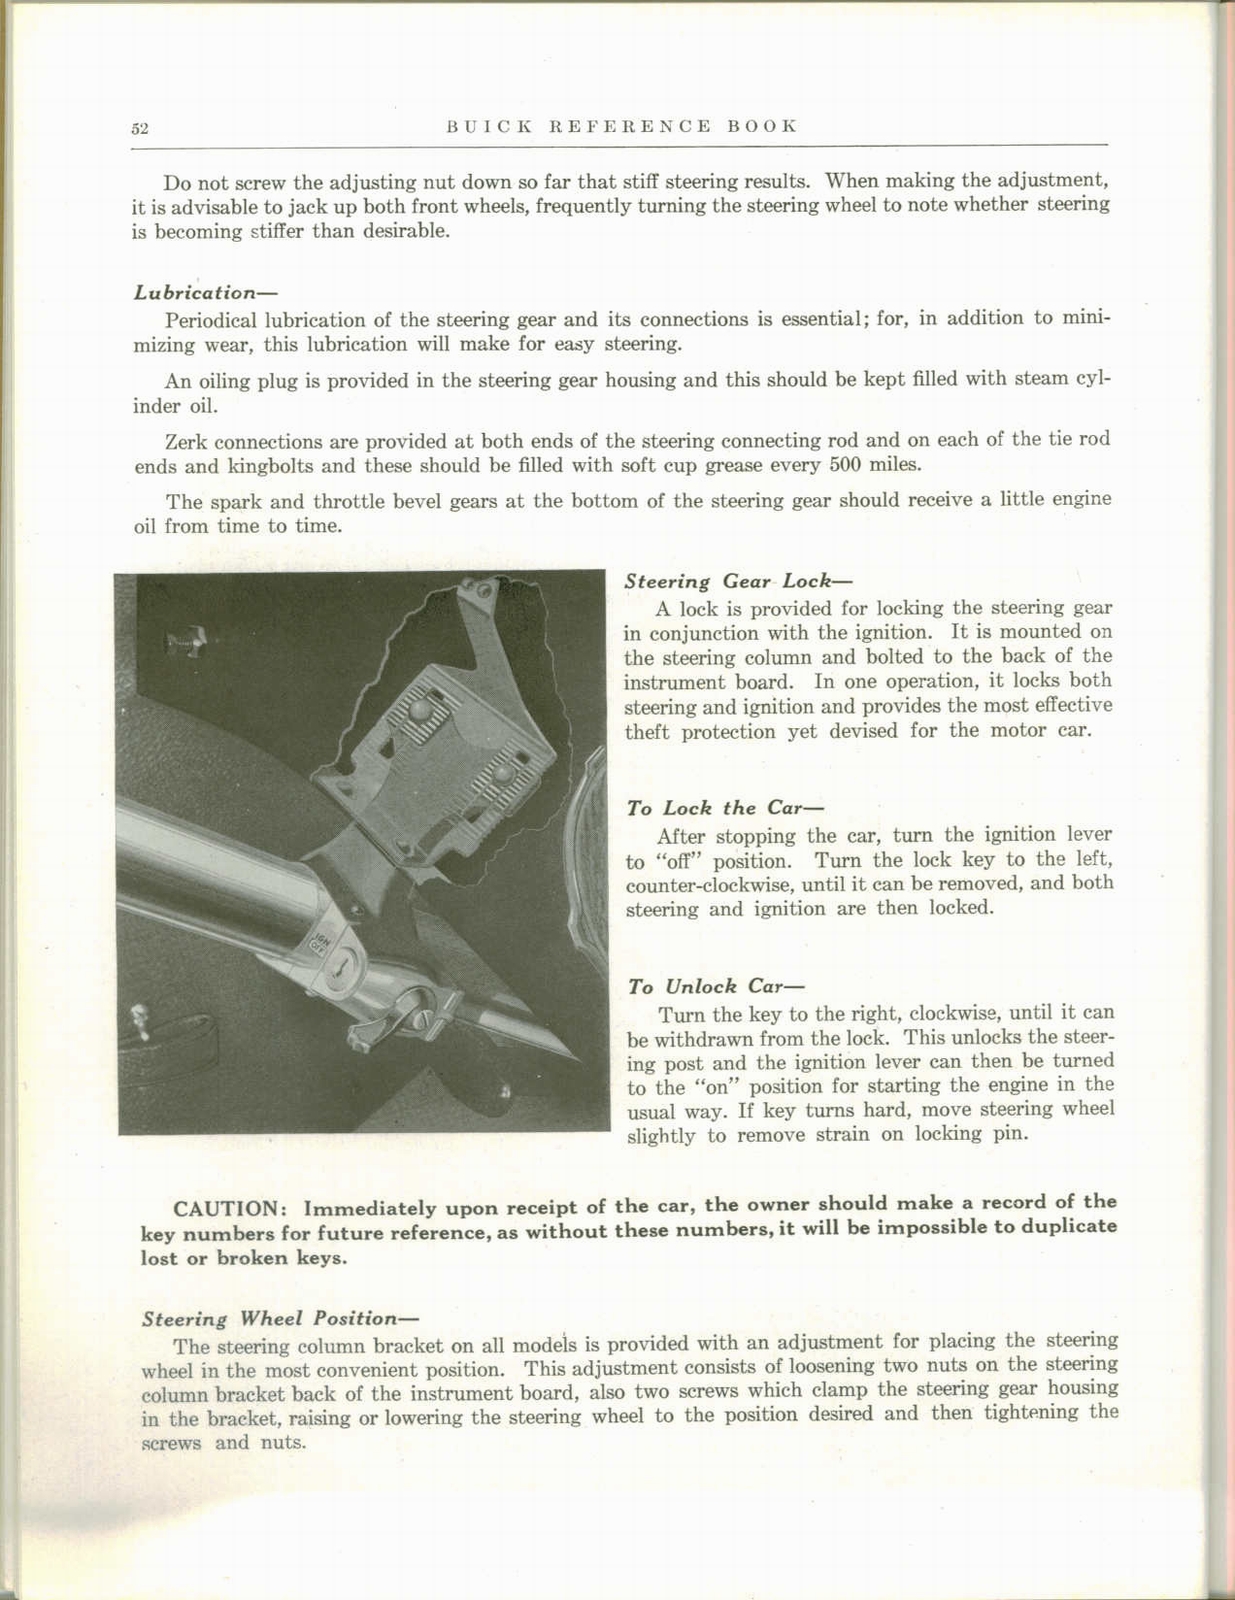 n_1928 Buick Reference Book-52.jpg